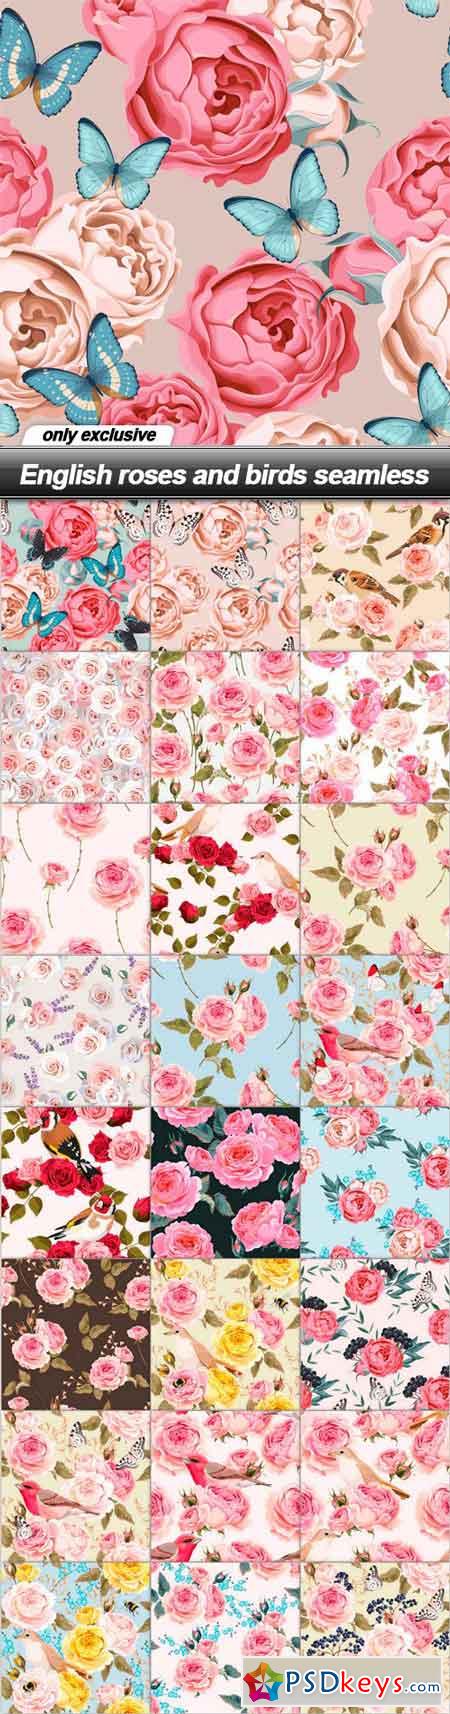 English roses and birds seamless - 25 EPS